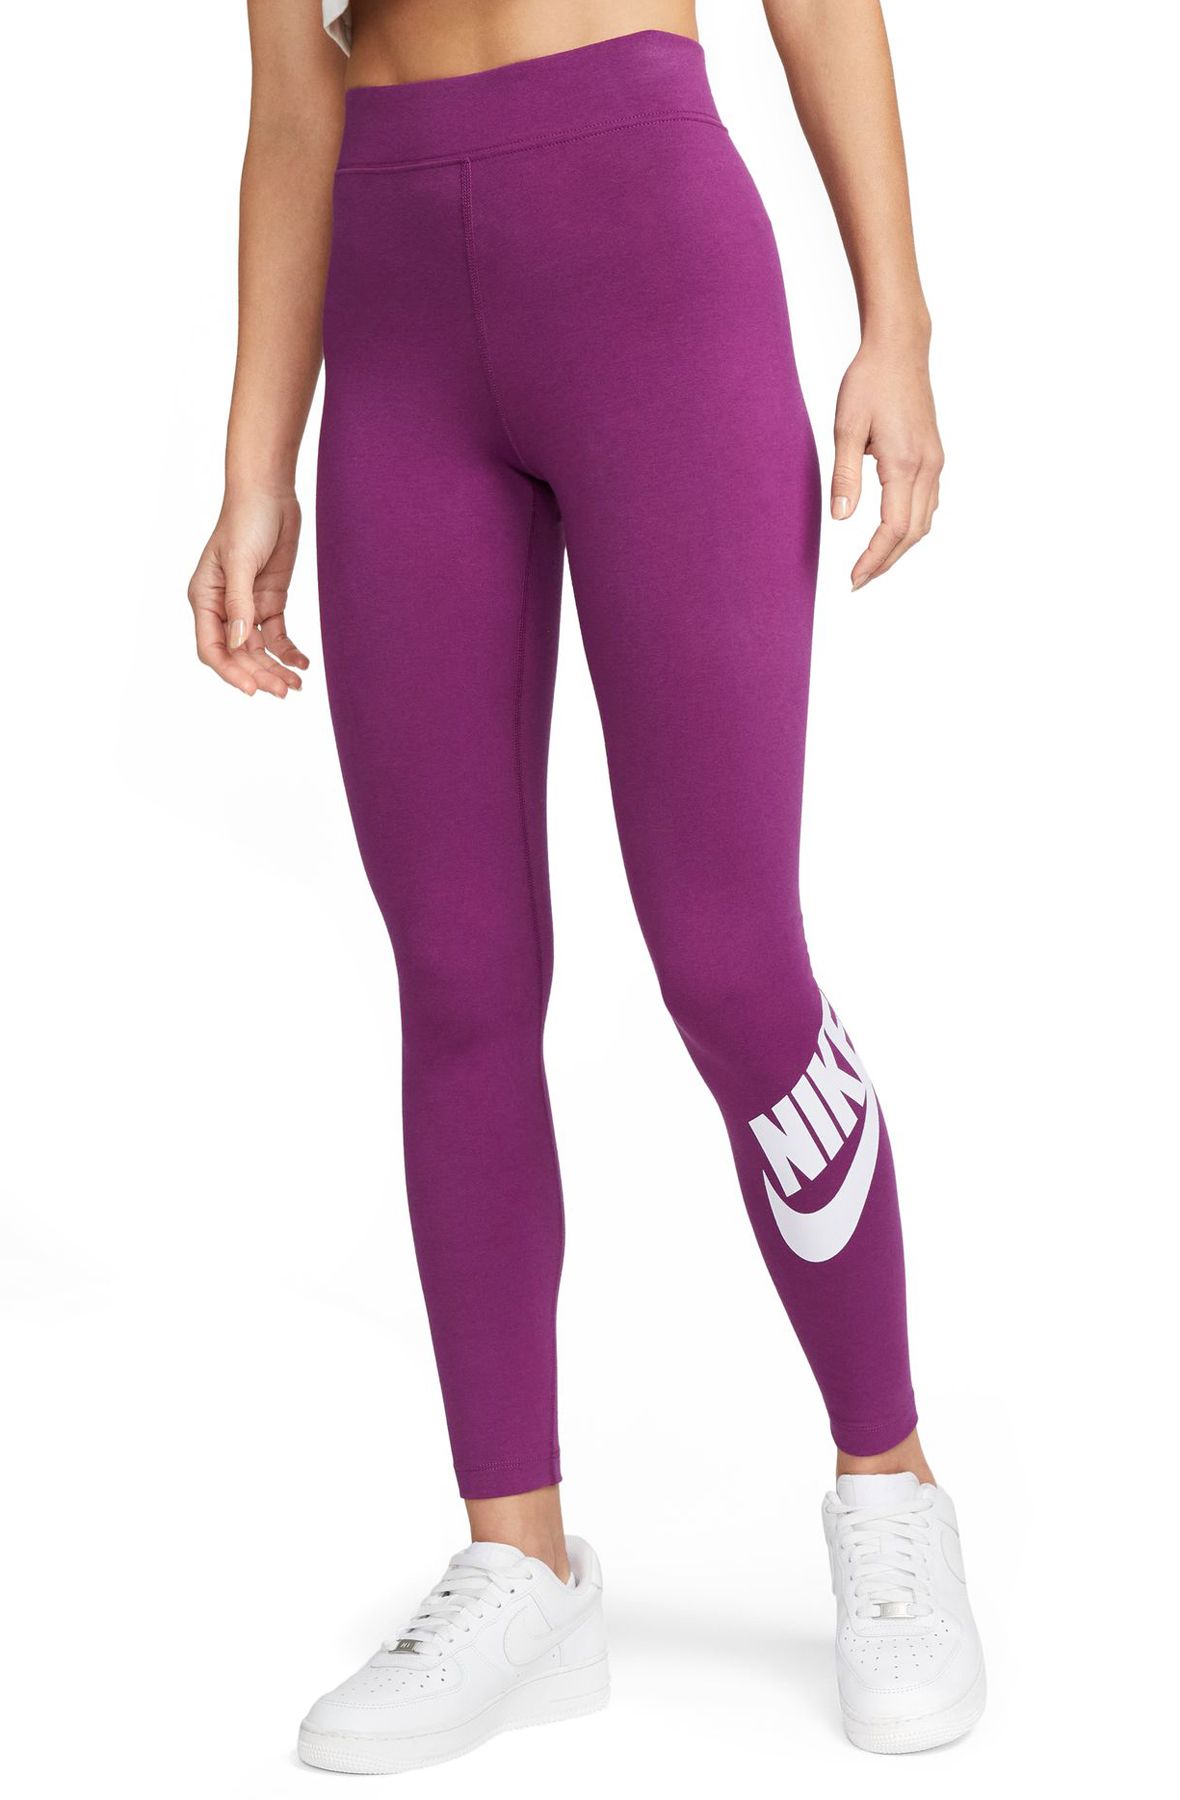 😱 Nike Women's Leggings are at Costco! I haven't seen Nike at